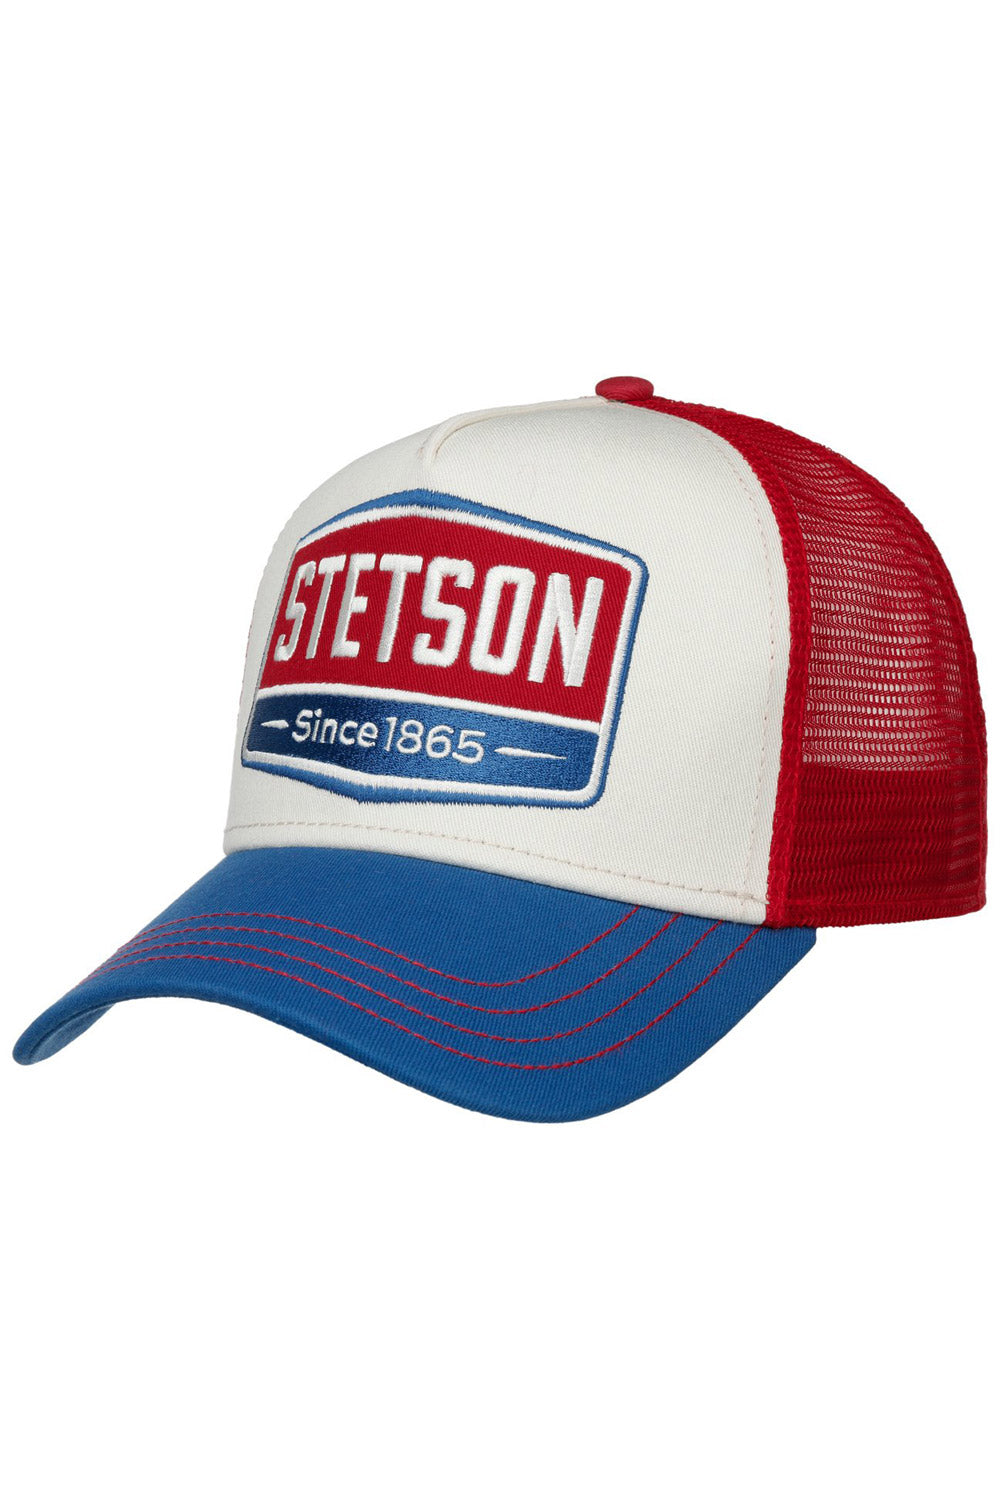 Buy the Stetson Highway Trucker Cap in Blue/White/Red at Intro. Spend £50 for free UK delivery. Official stockists. We ship worldwide.